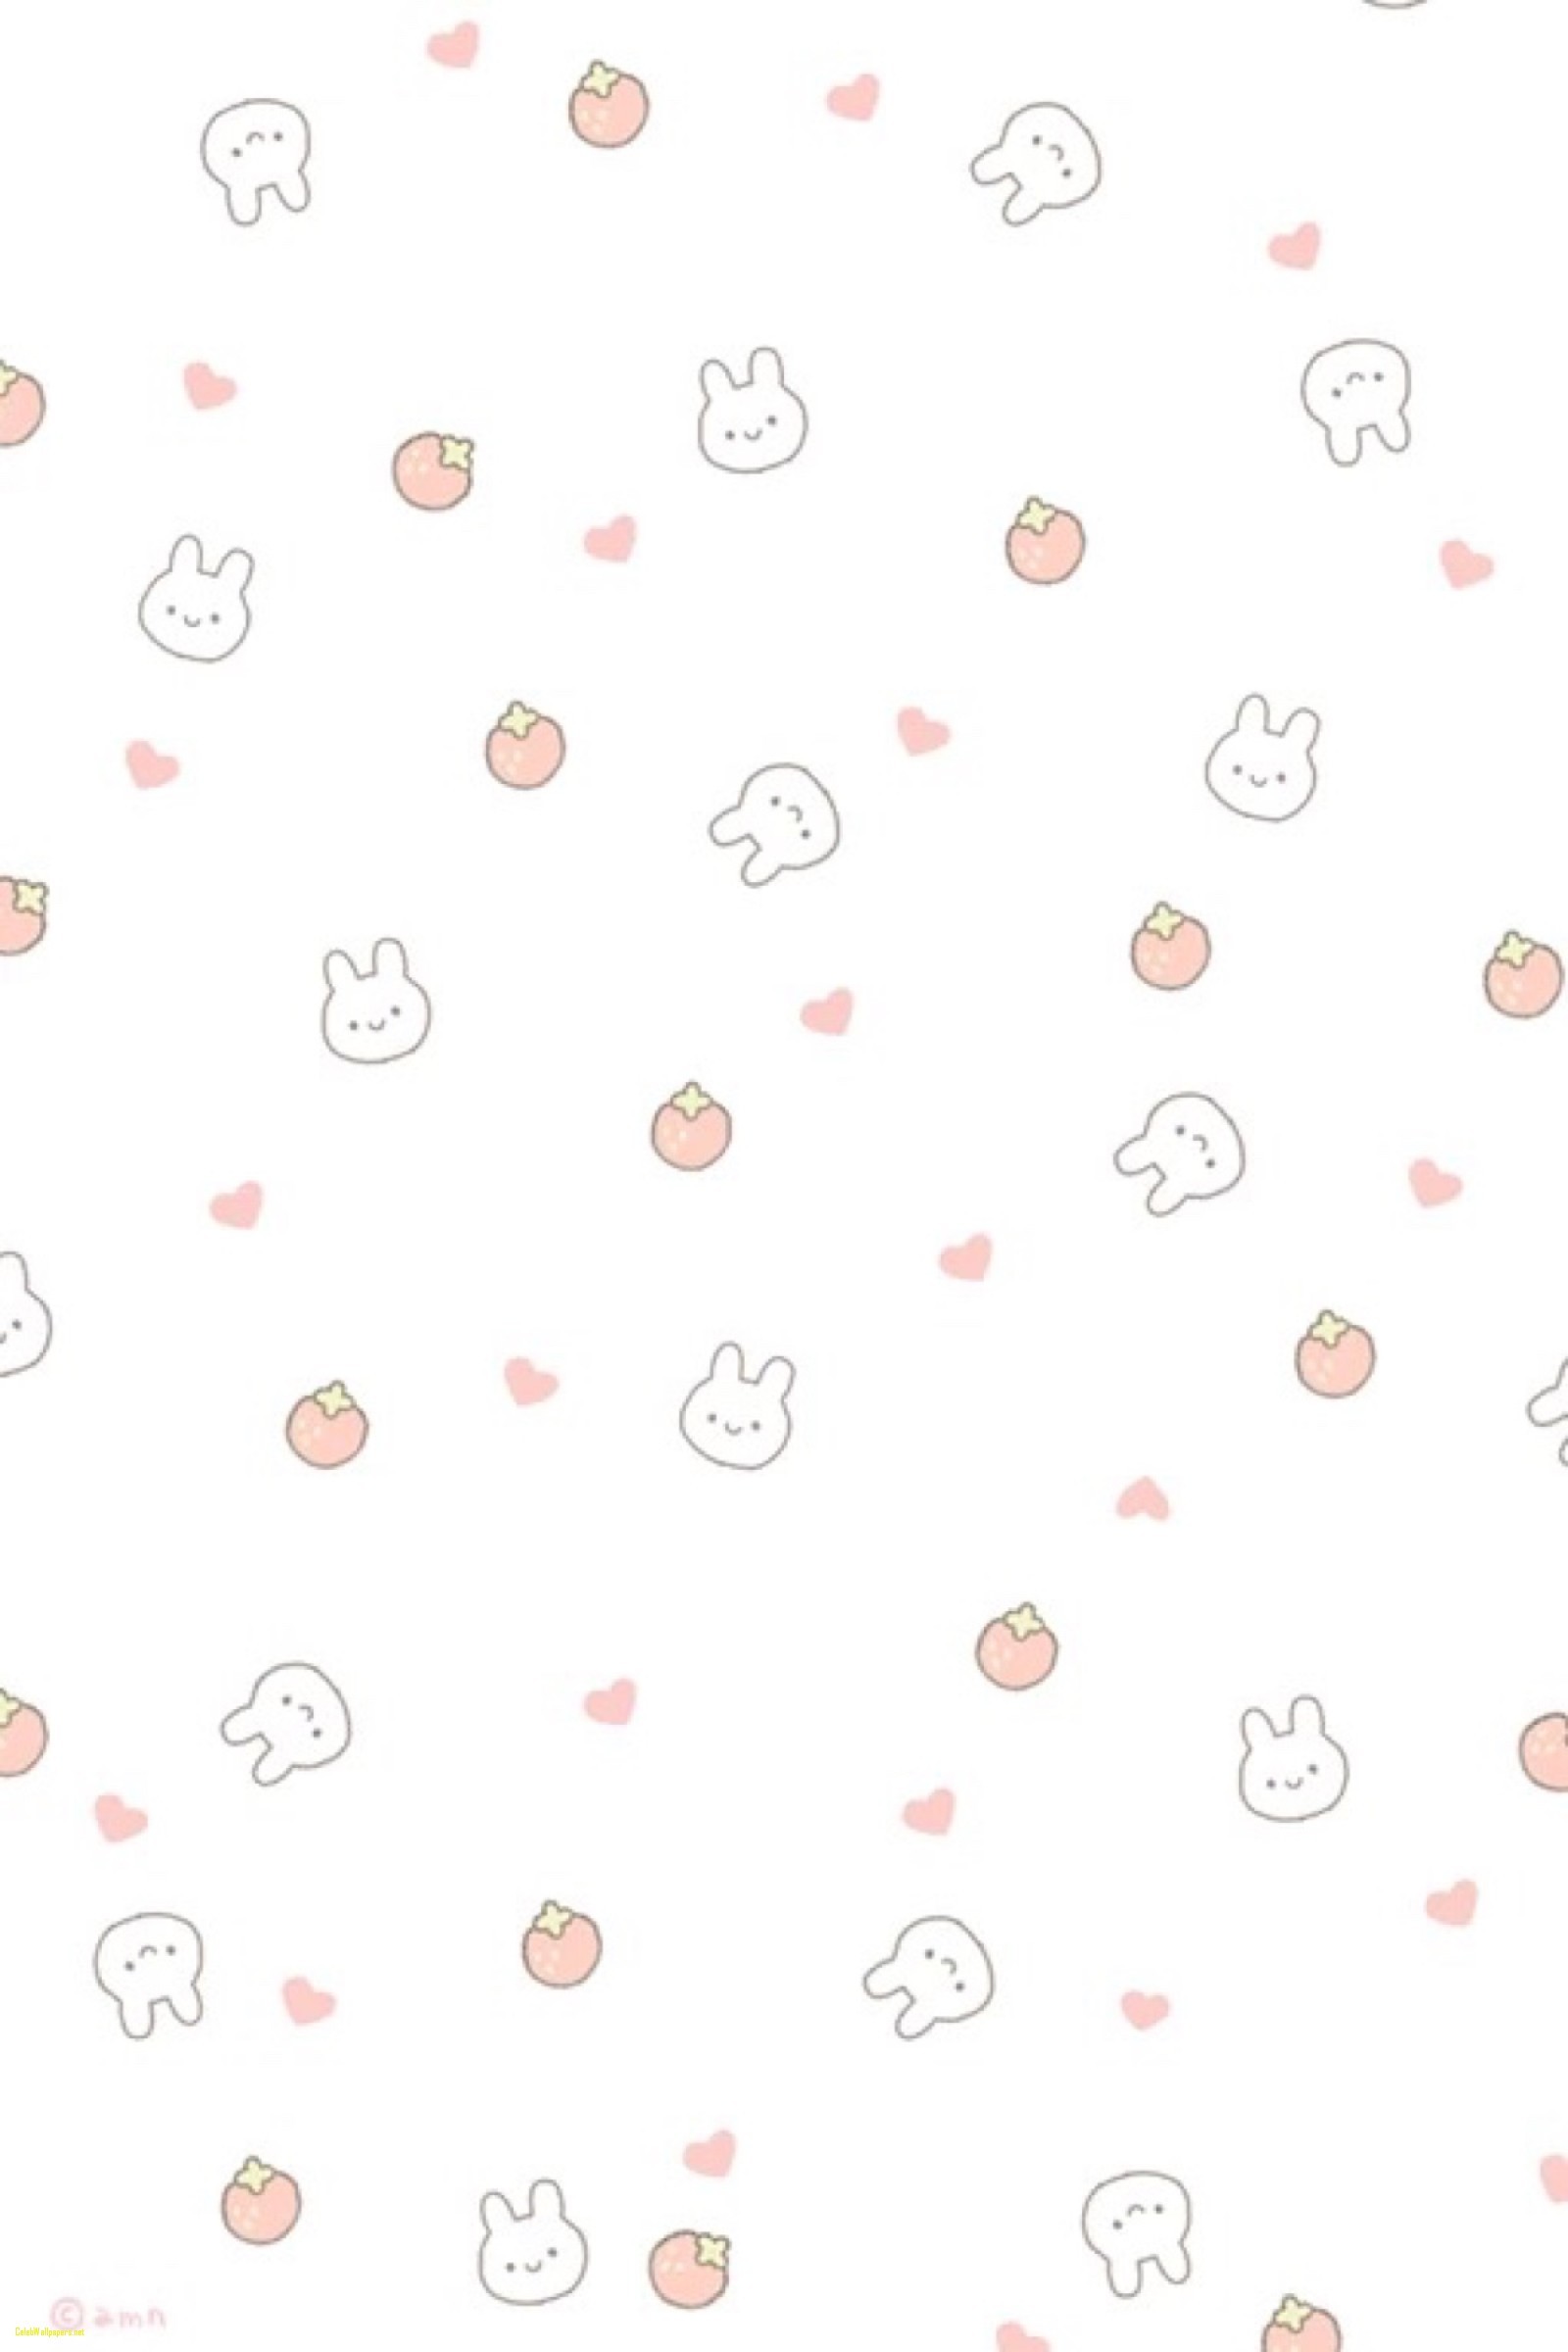 Cute Simple Wallpapers For Iphone - The best cute iPhone wallpaper